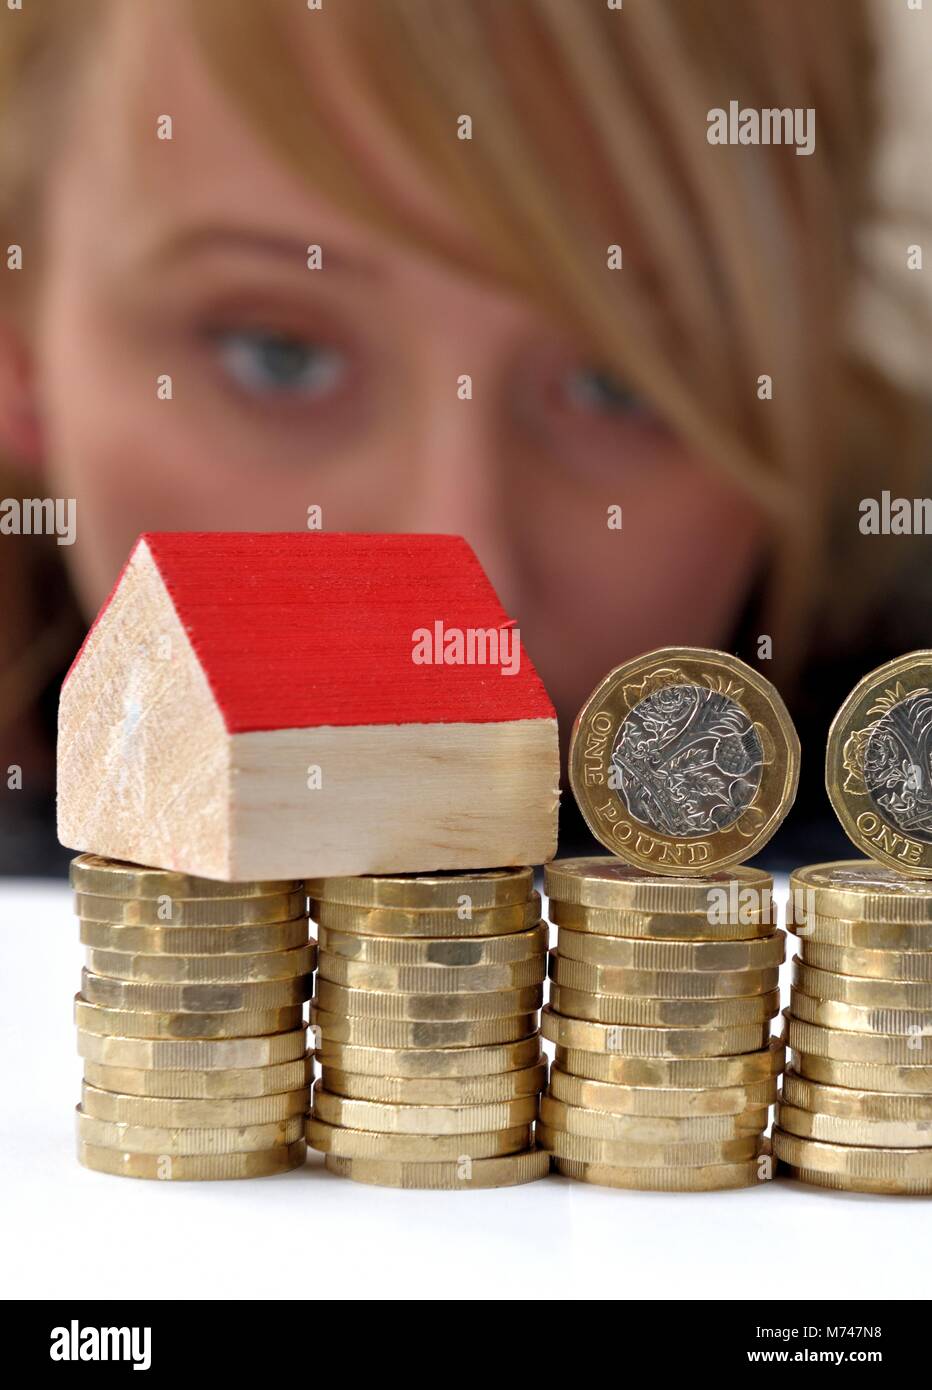 A small house on a stack of one pound coins house buying concept Stock Photo